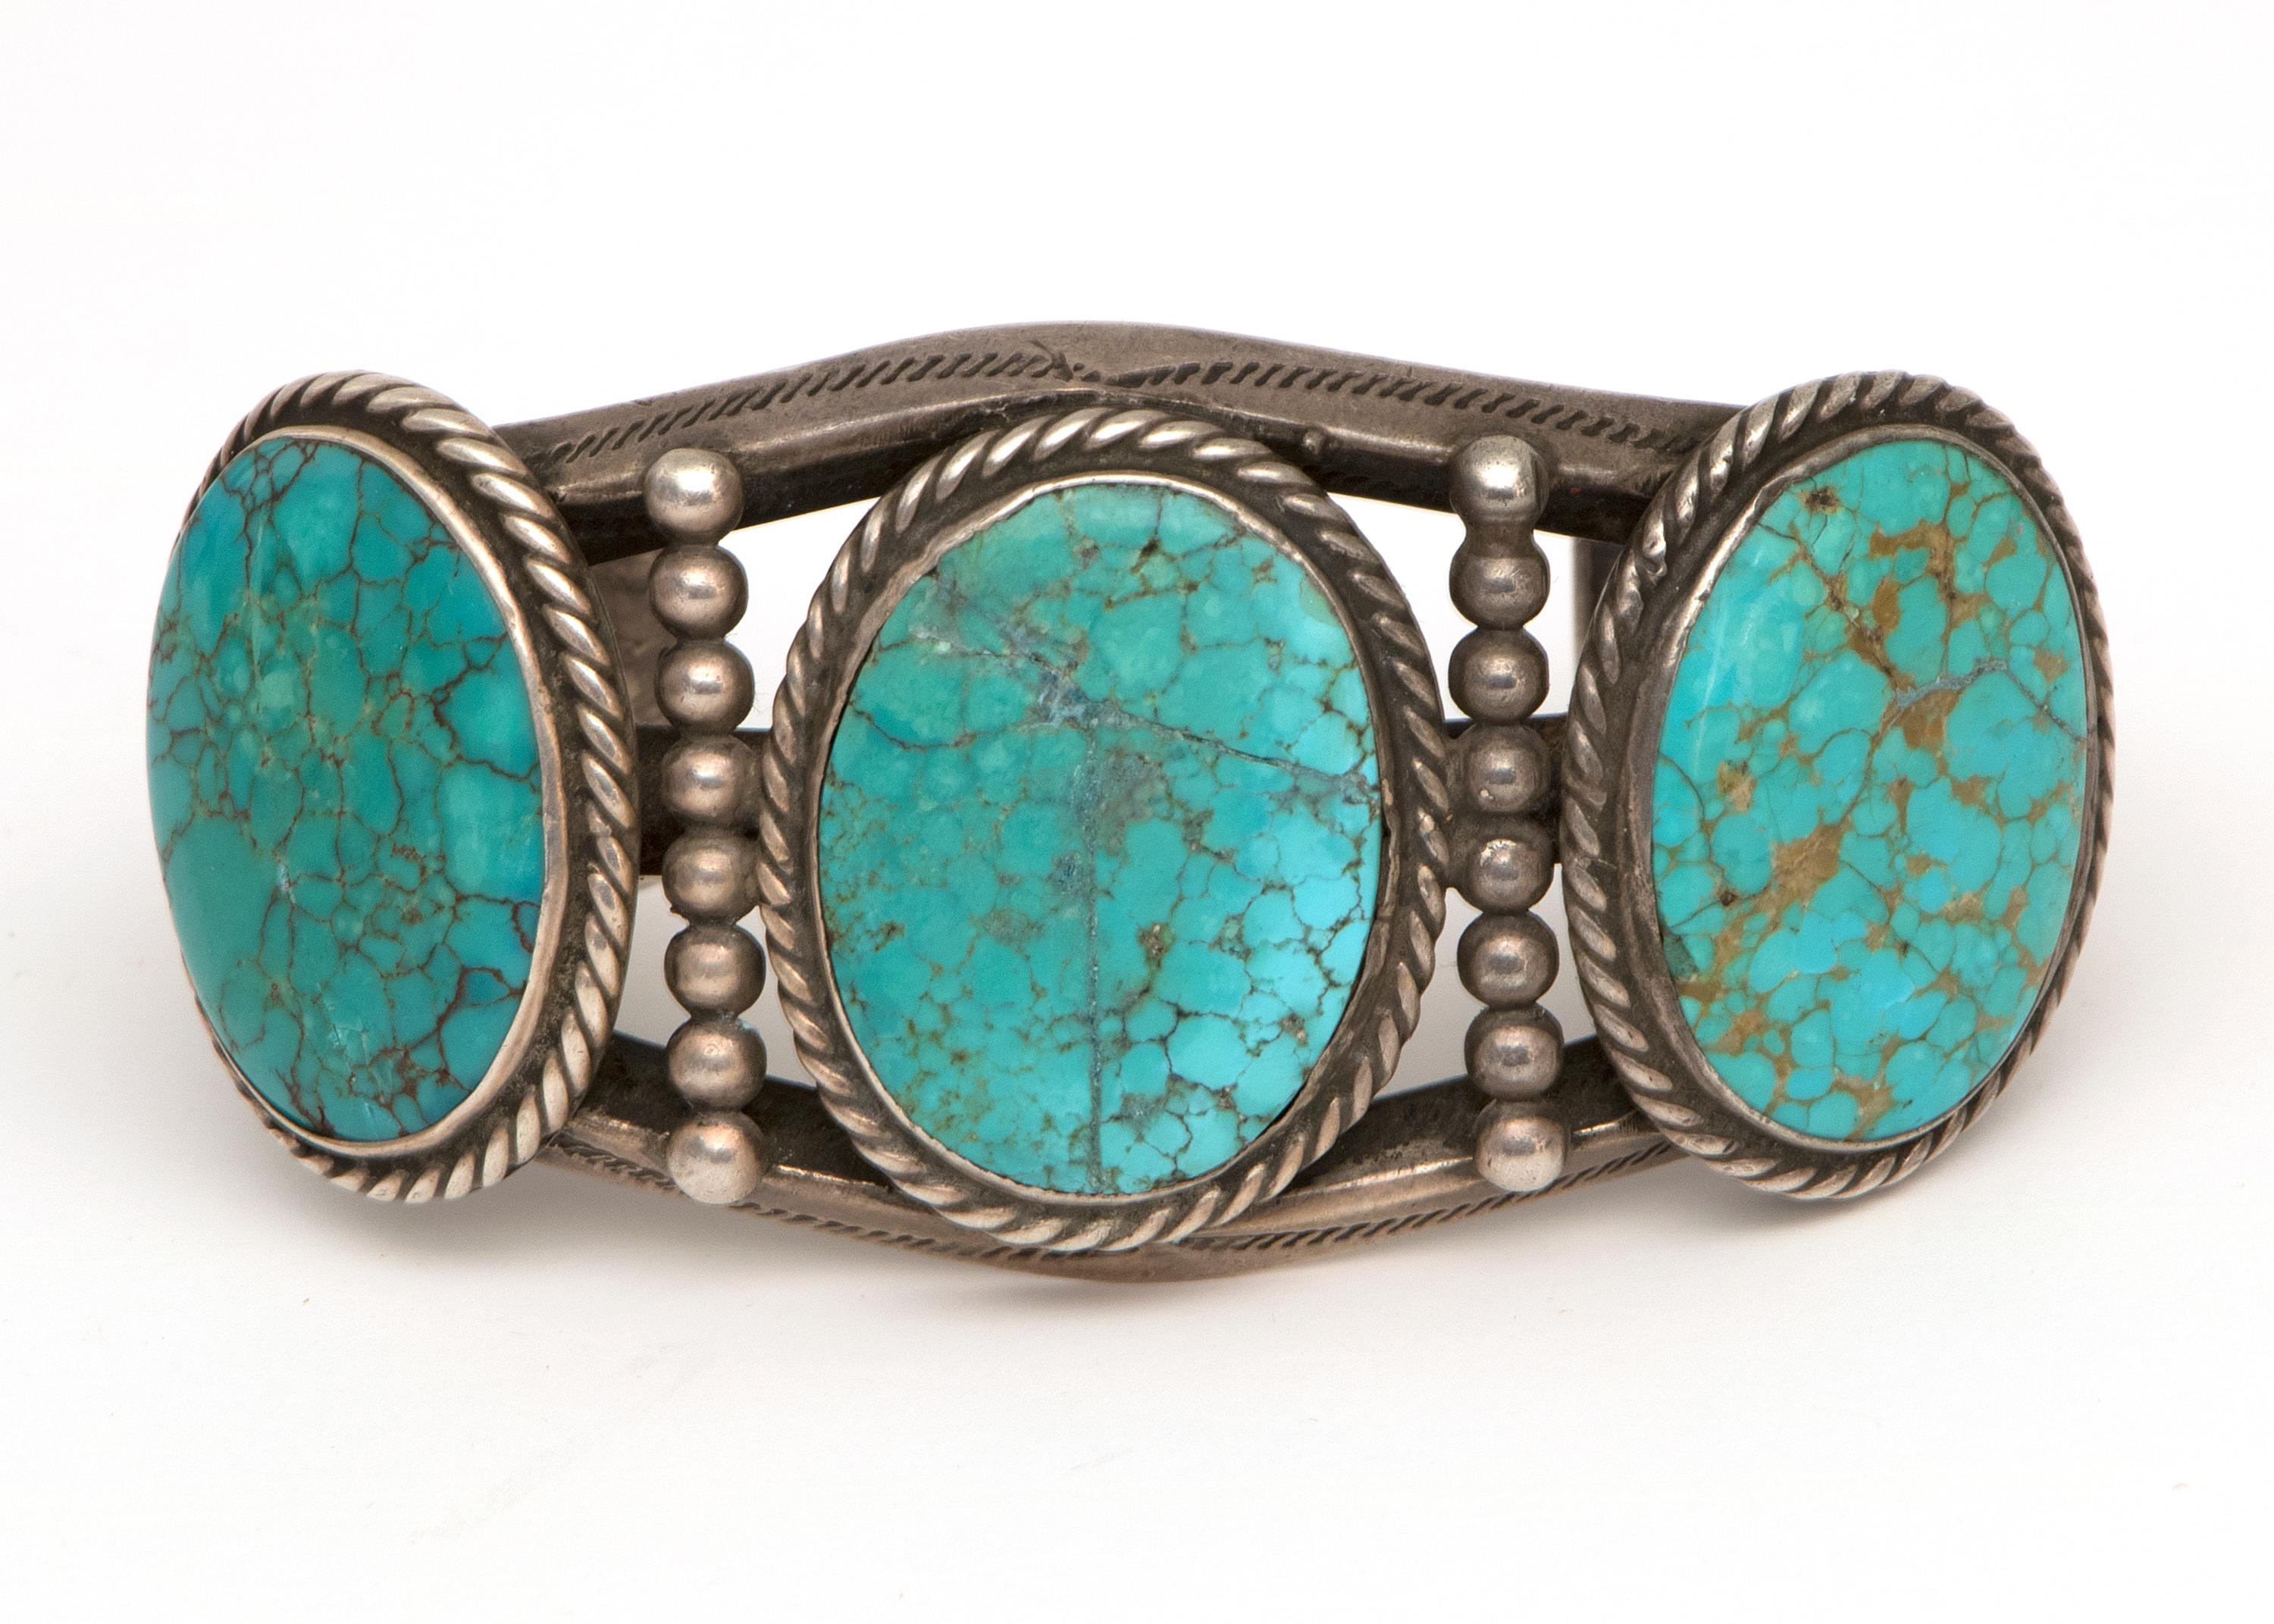 Native American Vintage Old Pawn Navajo Bracelet with Silver and Turquoise, circa 1930